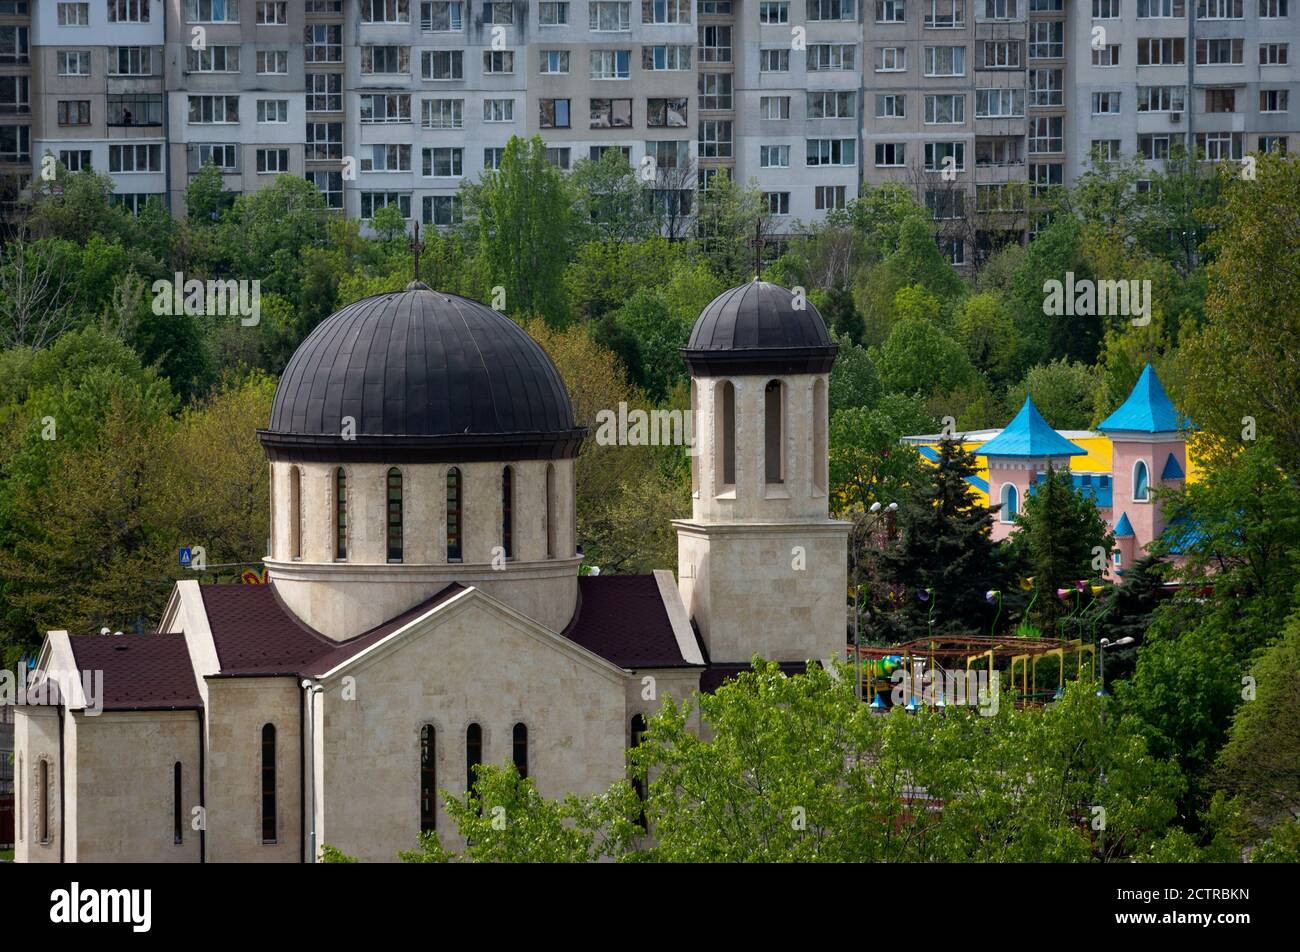 Urban view over park with modern church and colorful fairground surrounded by trees as urbanization juxtaposition concept, Sofia, Bulgaria Stock Photo